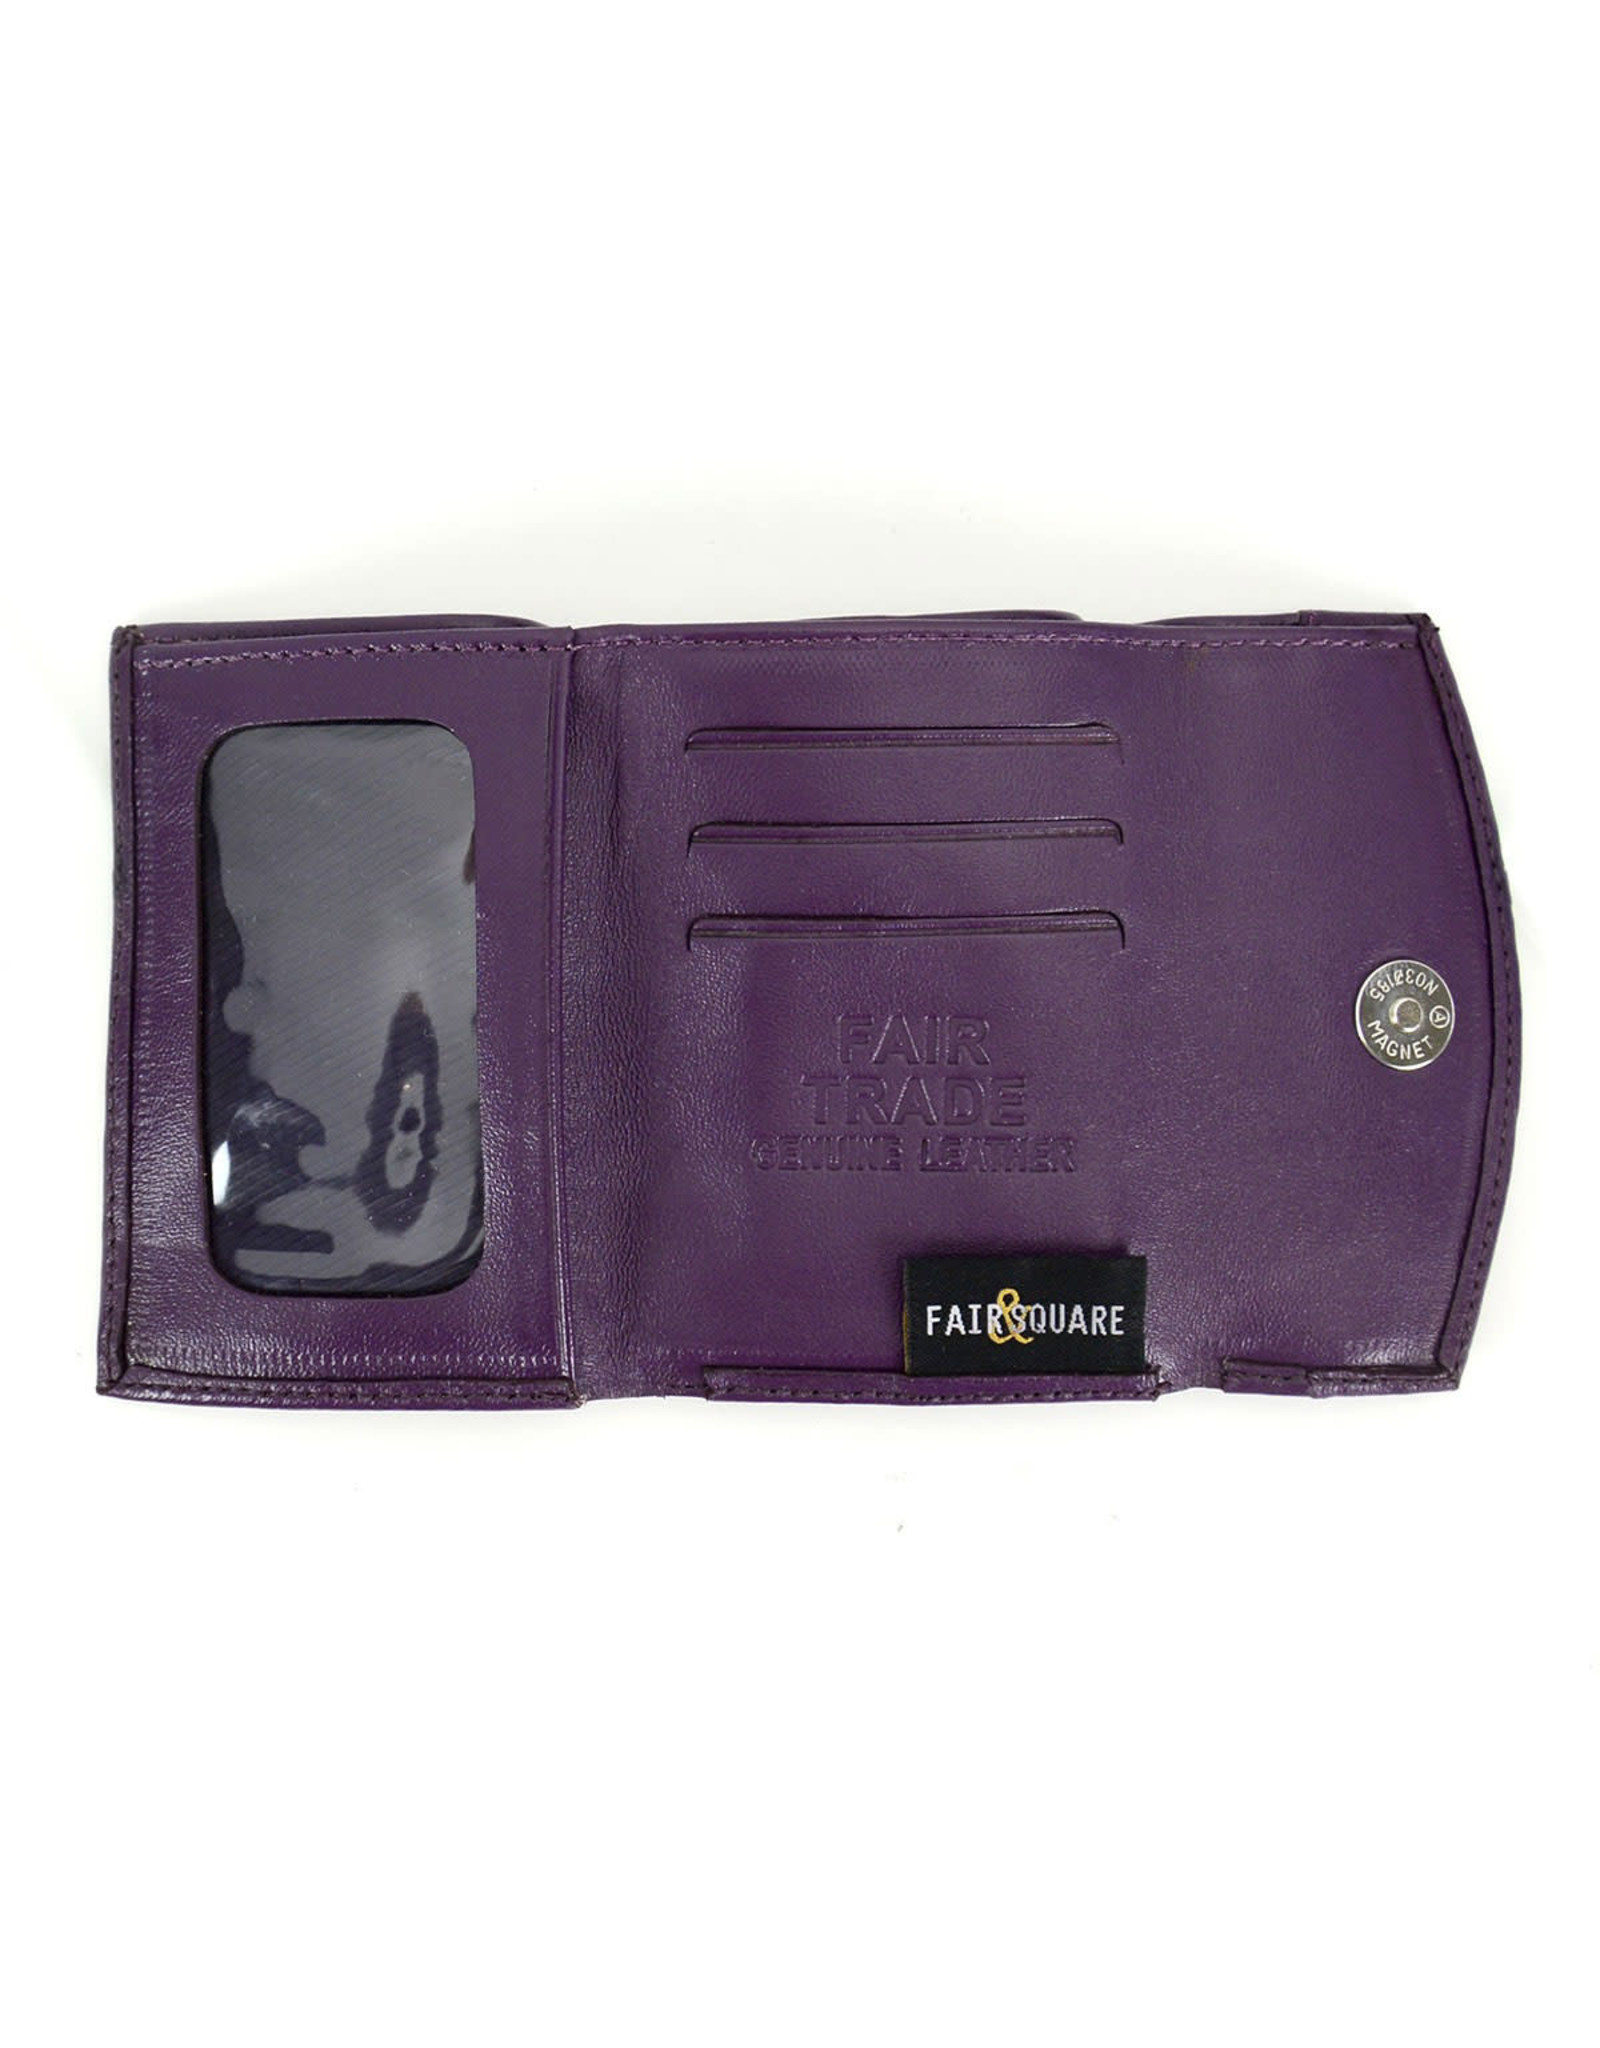 Peru Arco Small Leather Wallet, Assorted Colours, Peru